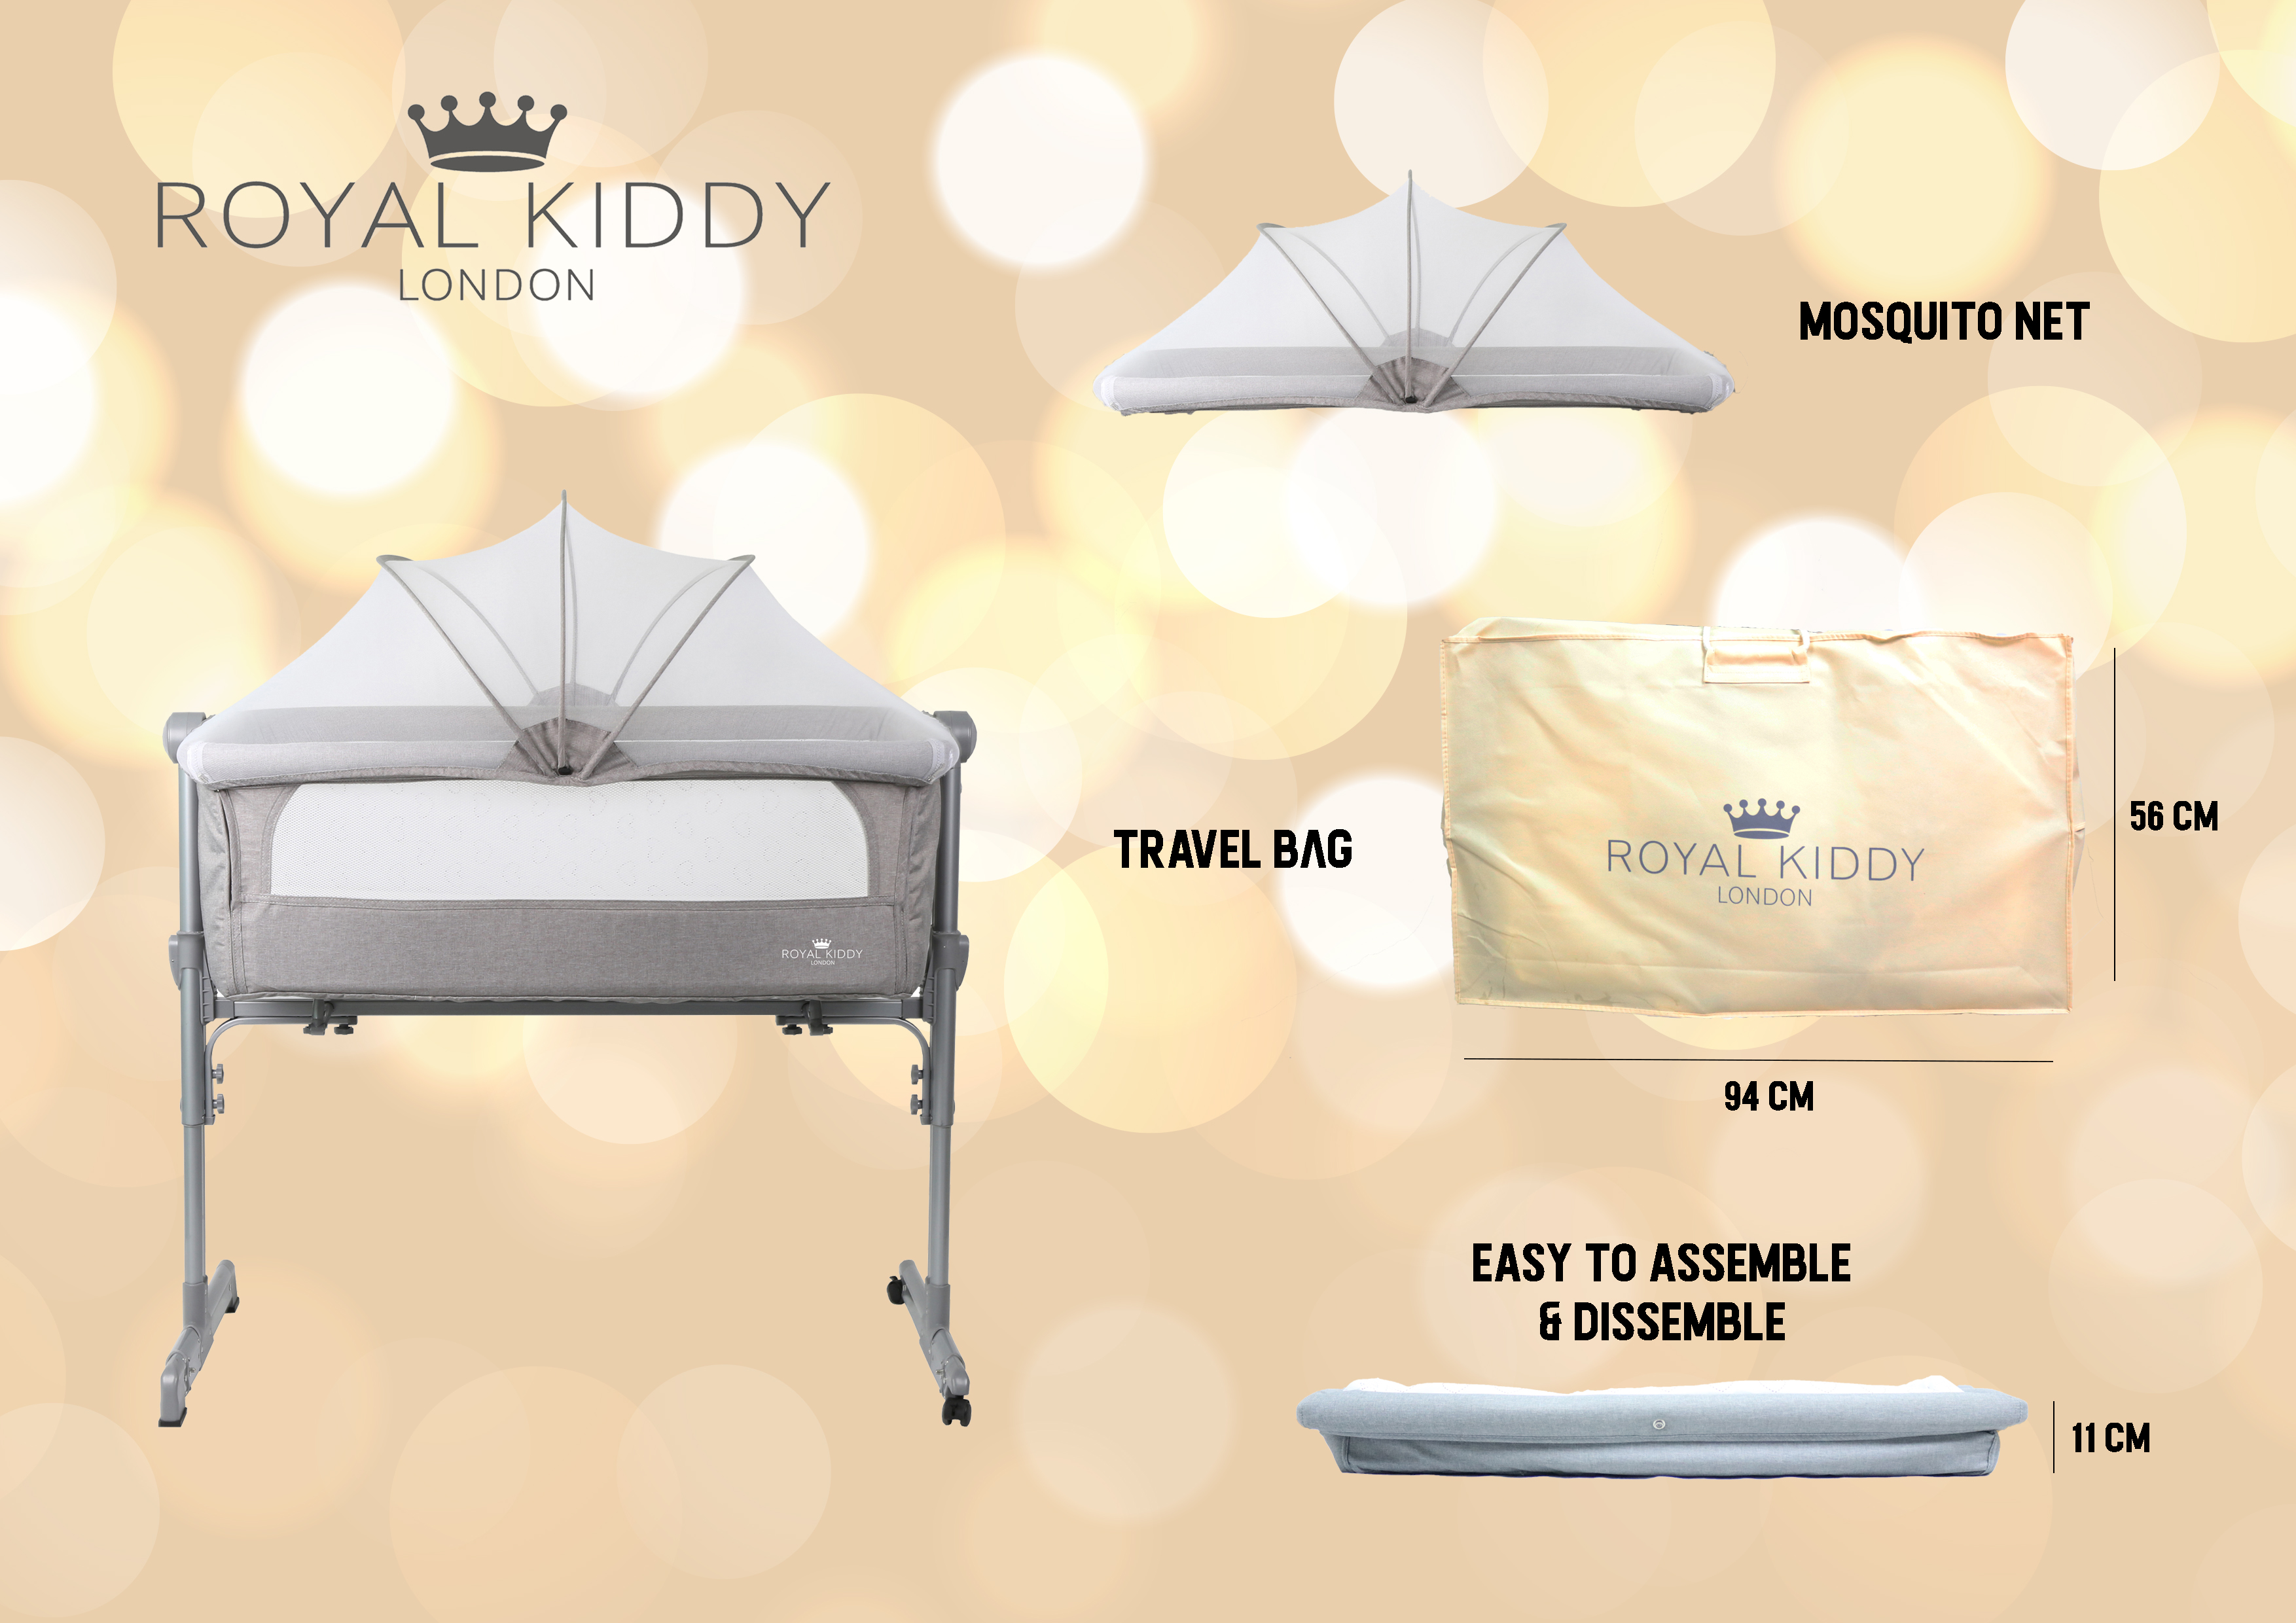 Royal Kiddy London 3 in 1 Night Angel Portable Bedside Baby Cot (Grey)